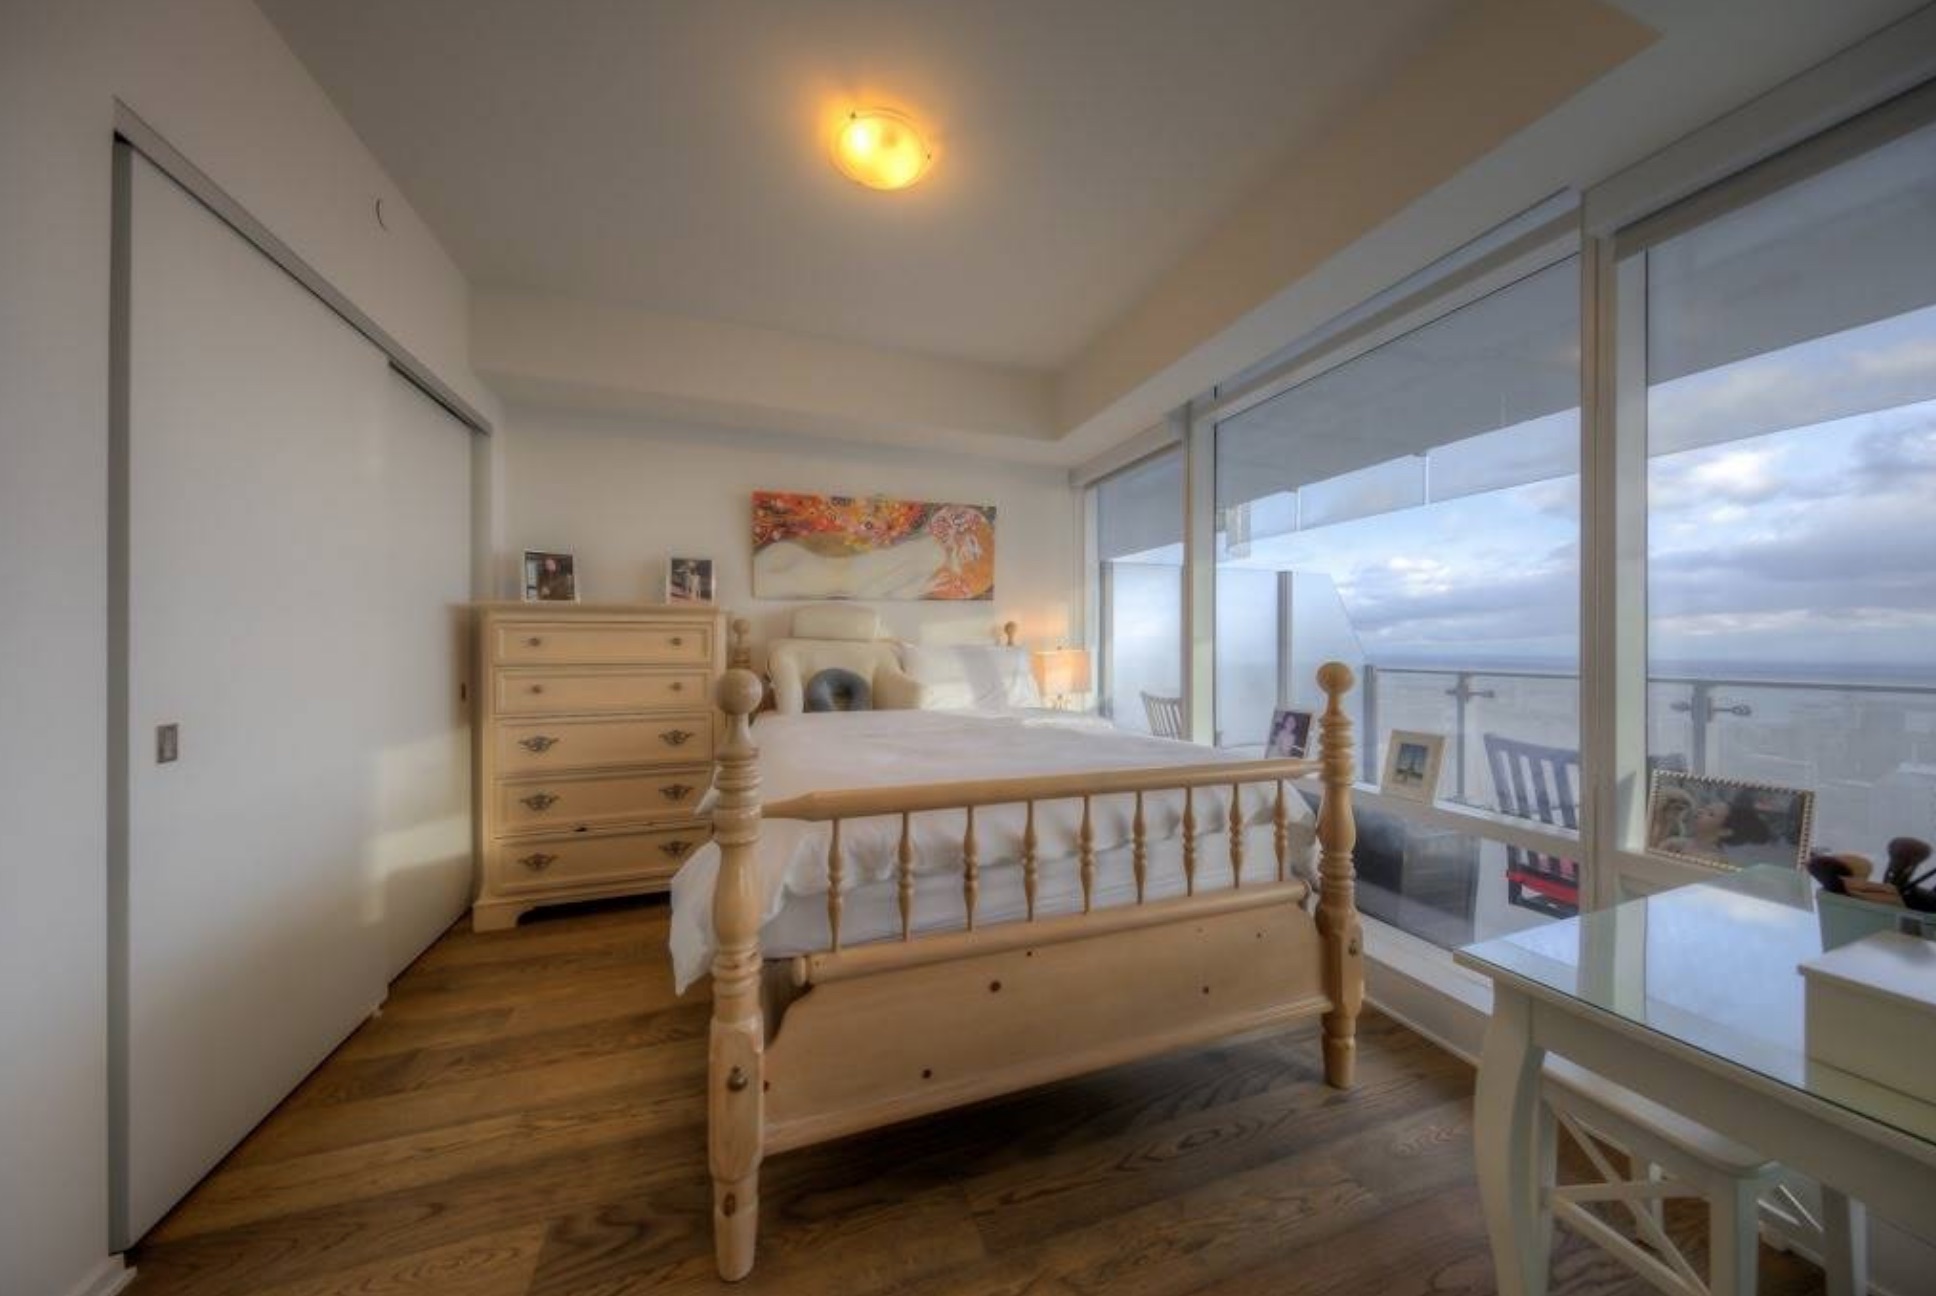 A narrow condo bedroom with hardwood flooring, wood furniture and floor-to-ceiling window overlooking the city